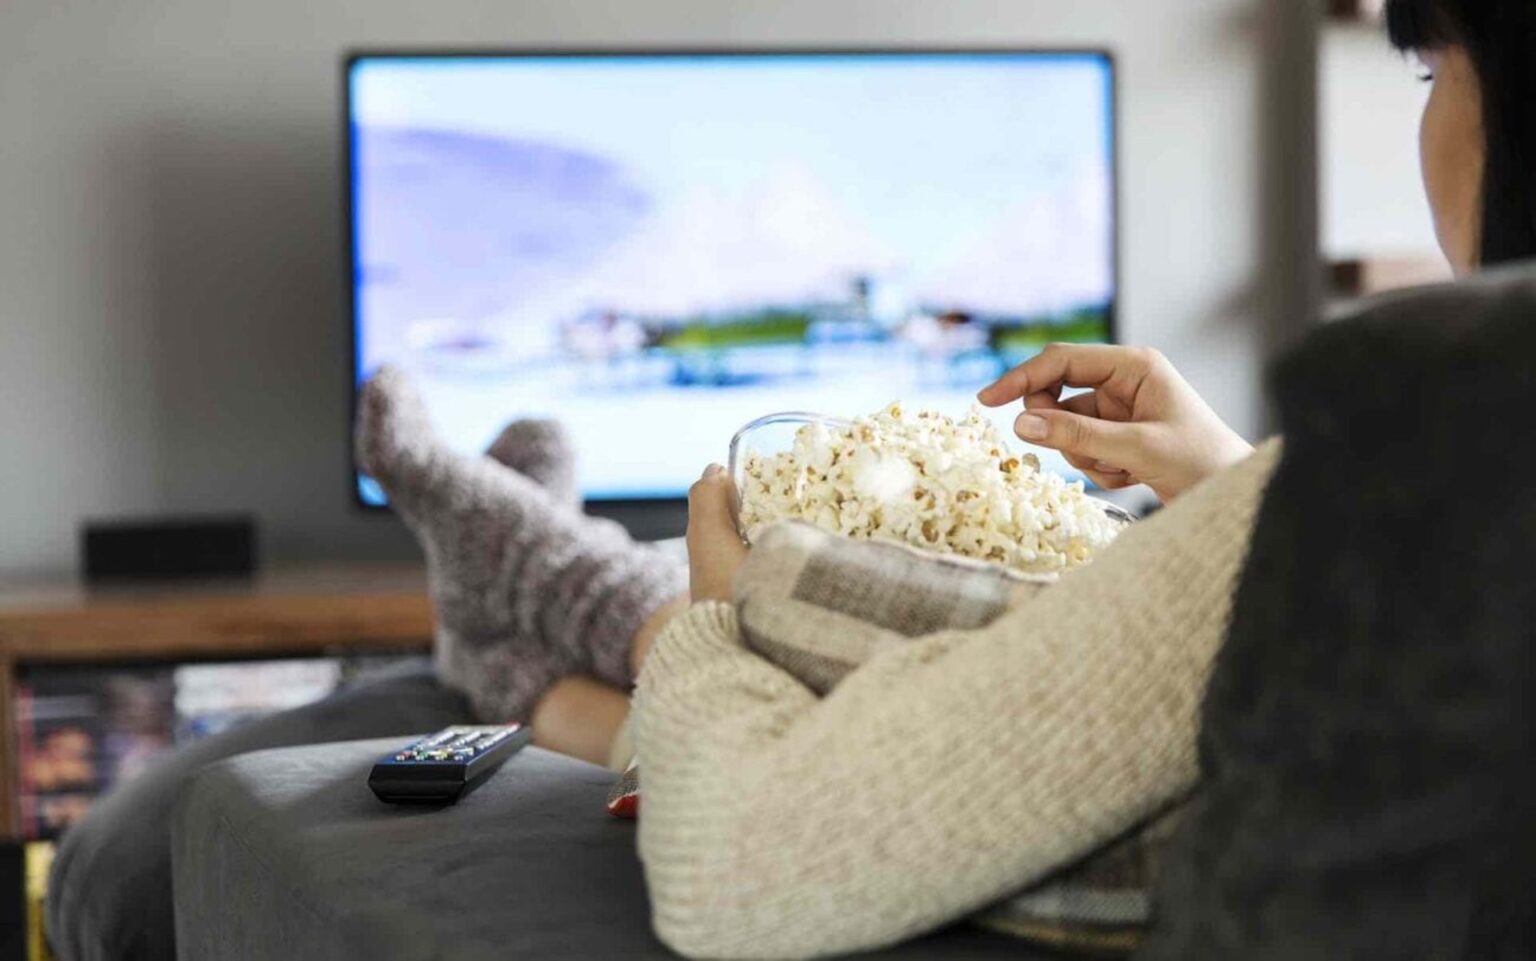 Still stuck at home or on break from work? Grab the snacks and treat yourself to a movie night! Check out our list of must watch movies on HBO Max.